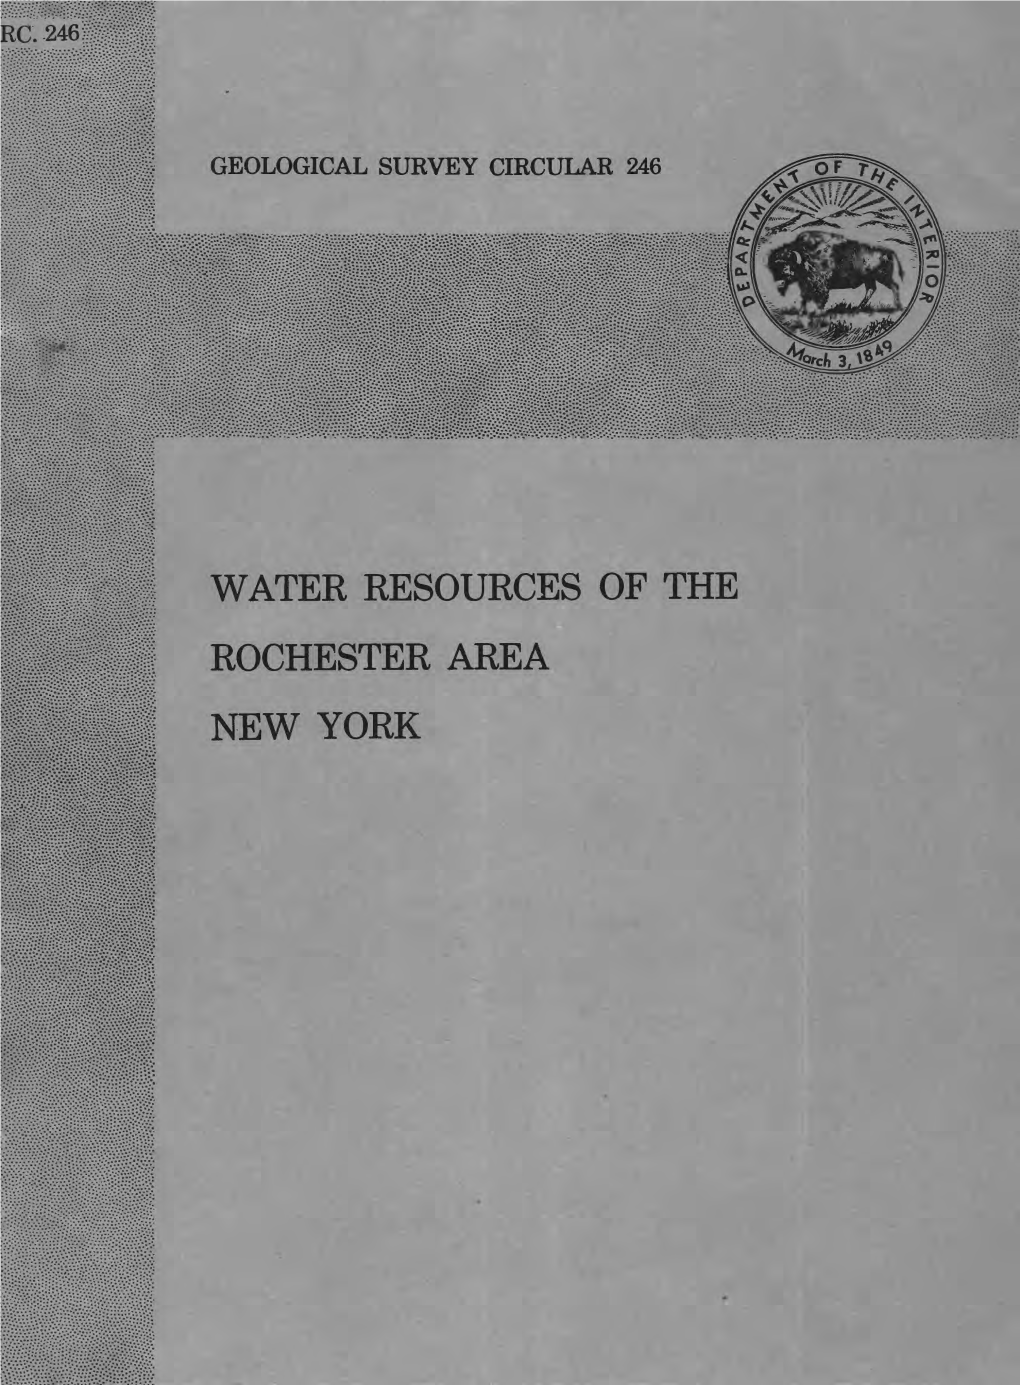 Water Resources of the Rochester Area New York